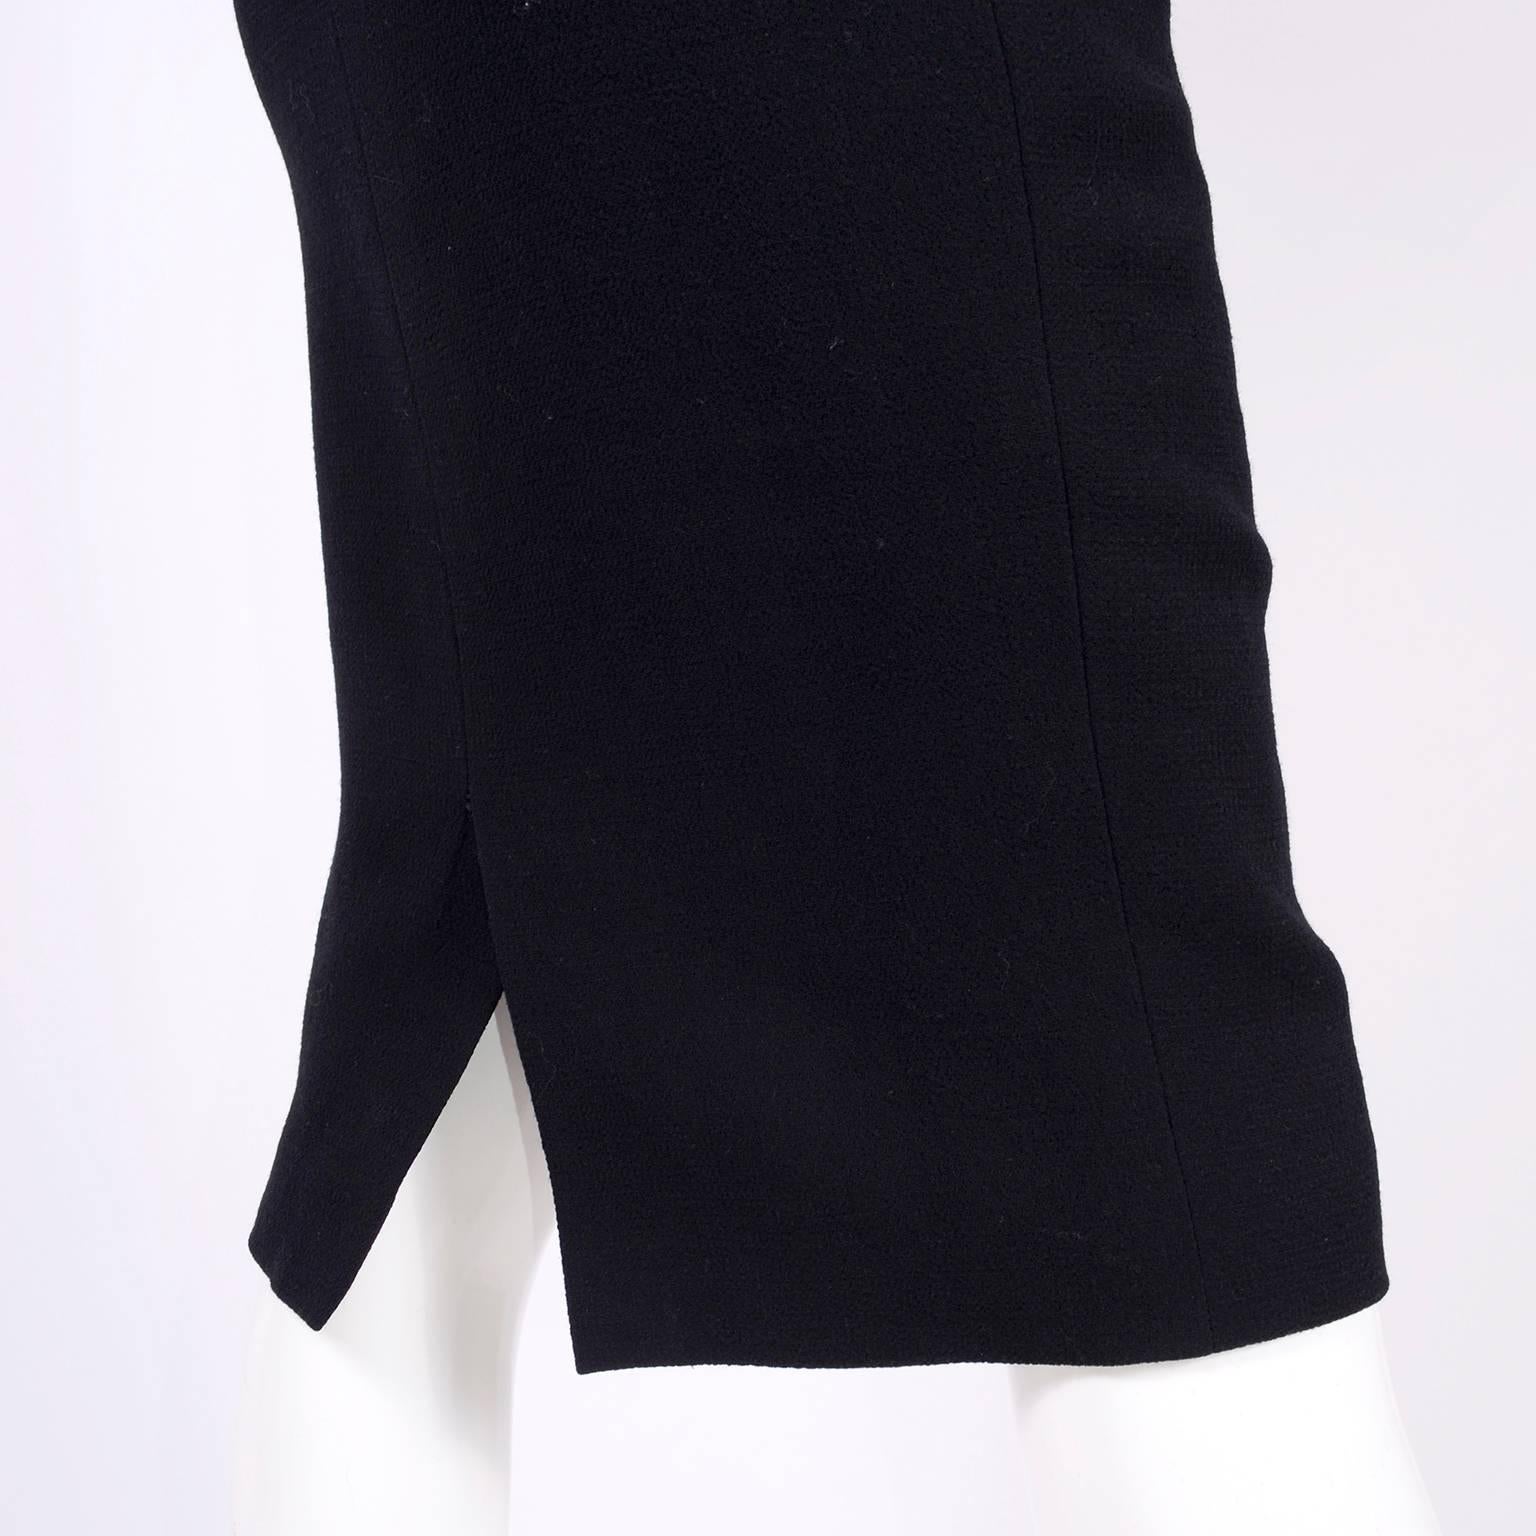 Deadstock New W/ Tags Gianni Versace Couture Vintage Little Black Dress 1995/96 For Sale 2